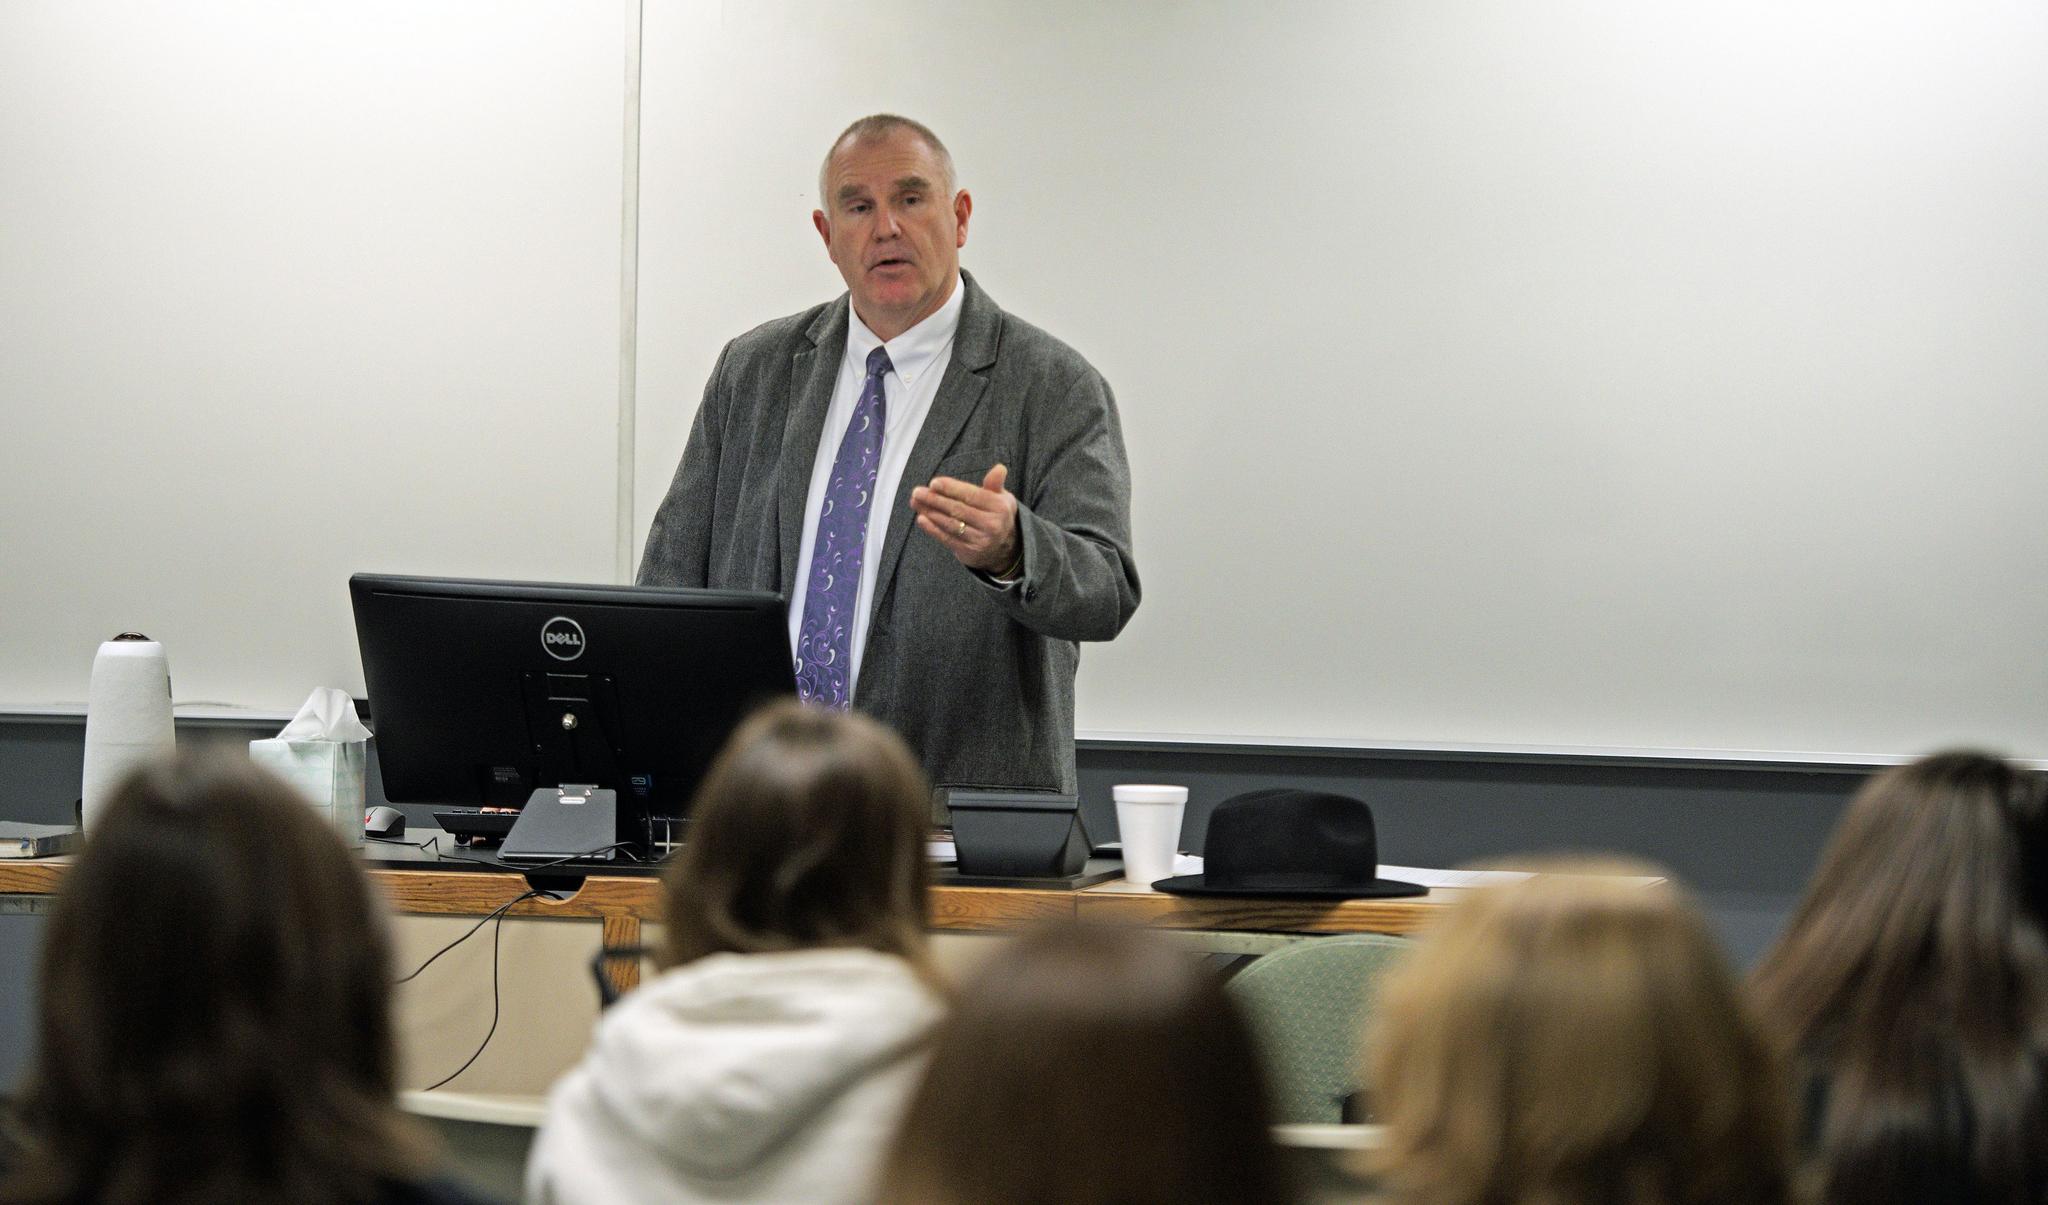 Professor Steve Meacham discusses a current criminal cold case with his criminal justice students at Cedarville University